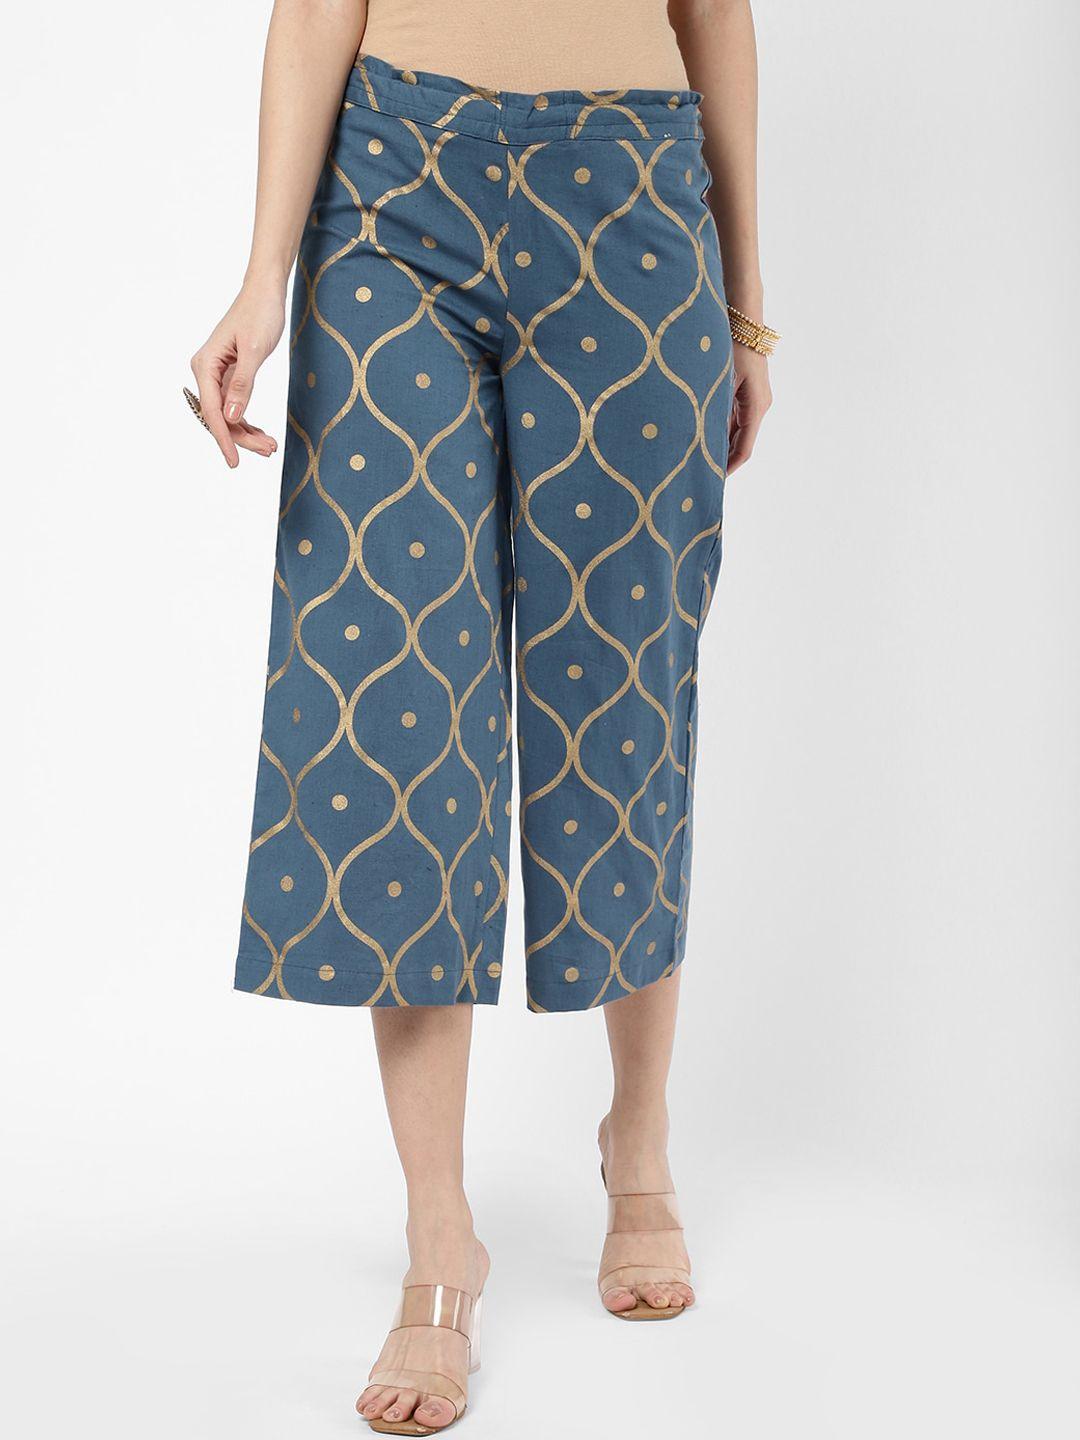 r&b women printed culottes trousers